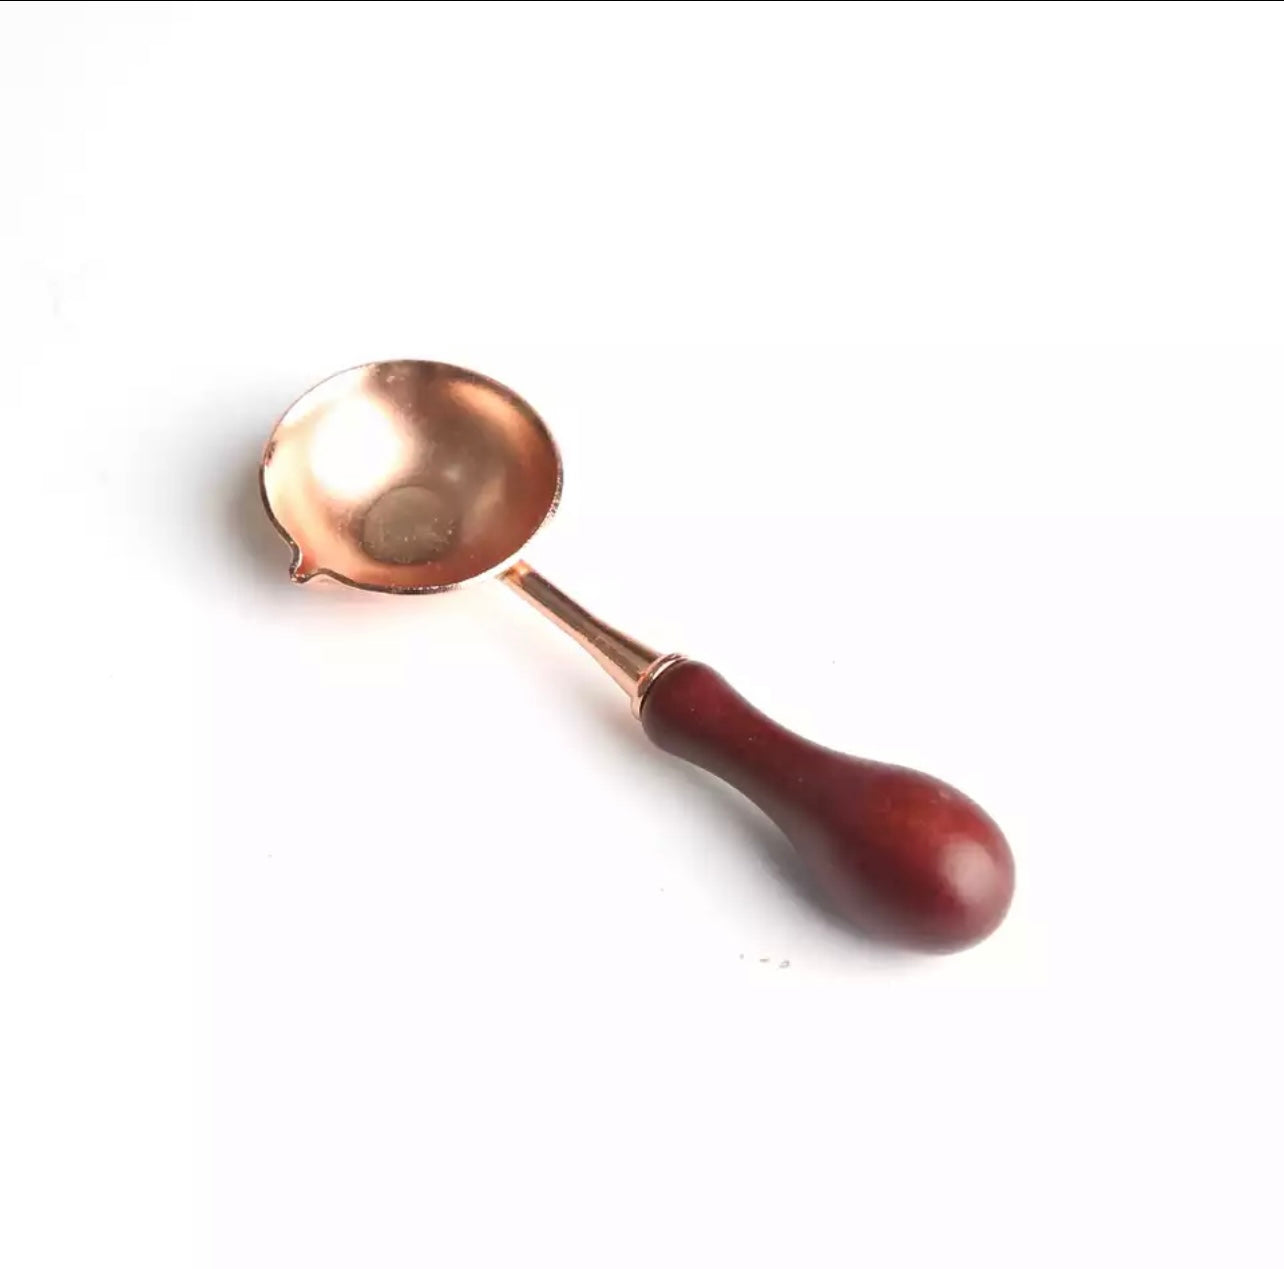 Wax Seal Stamp Set. Lacquered Wood Furnace & Spoon